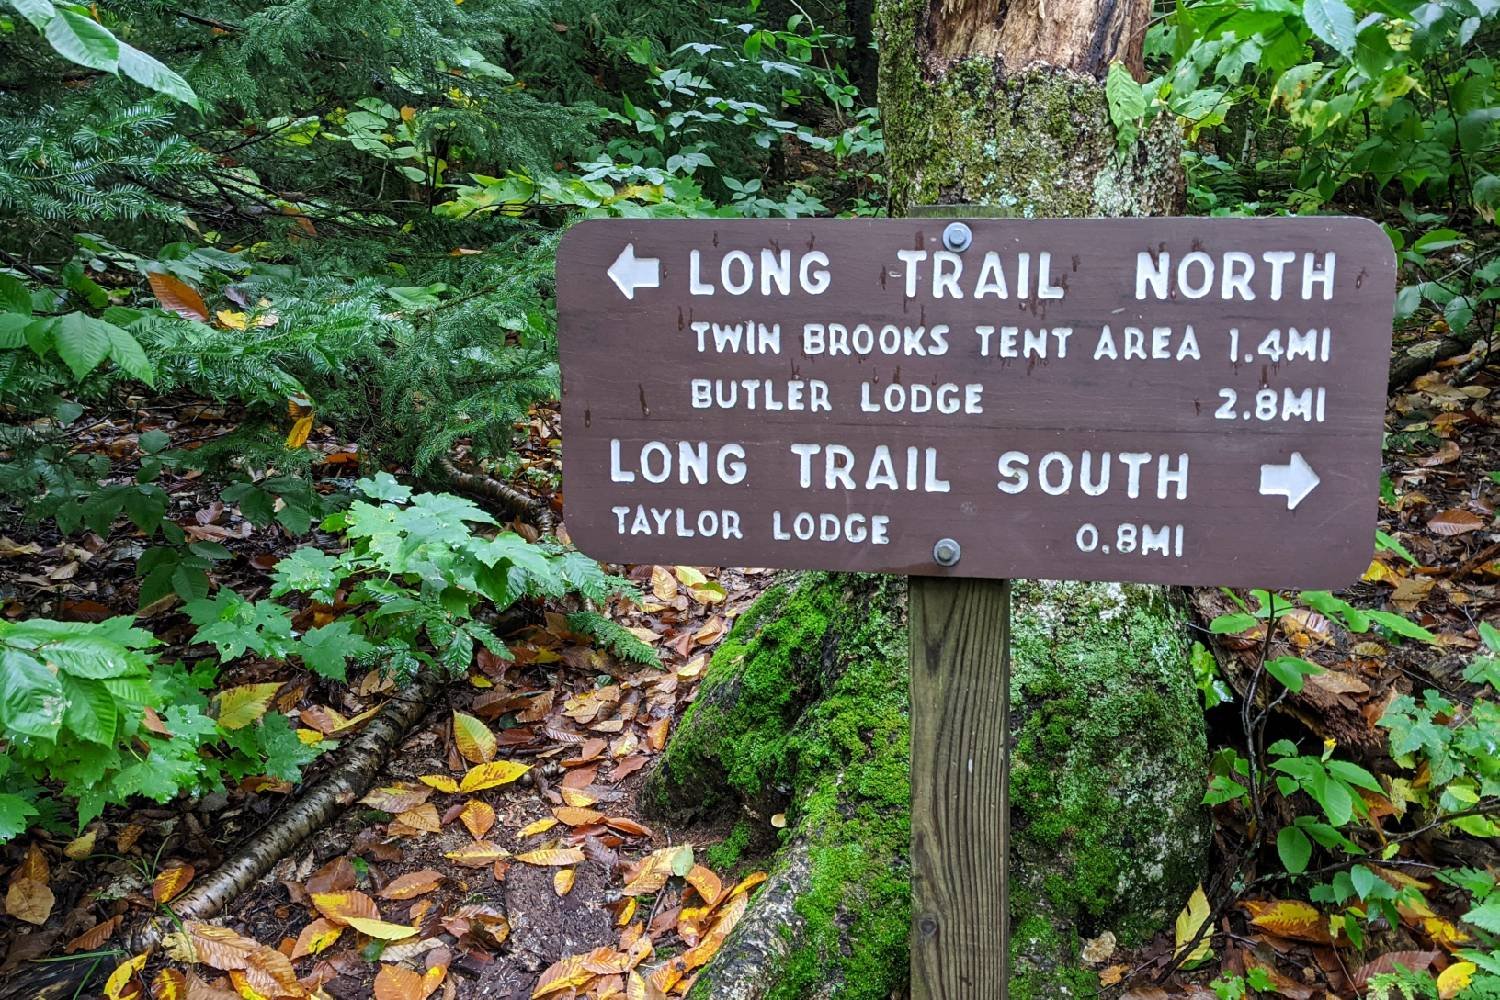 A sign marking Long Trail North and Long Trail South